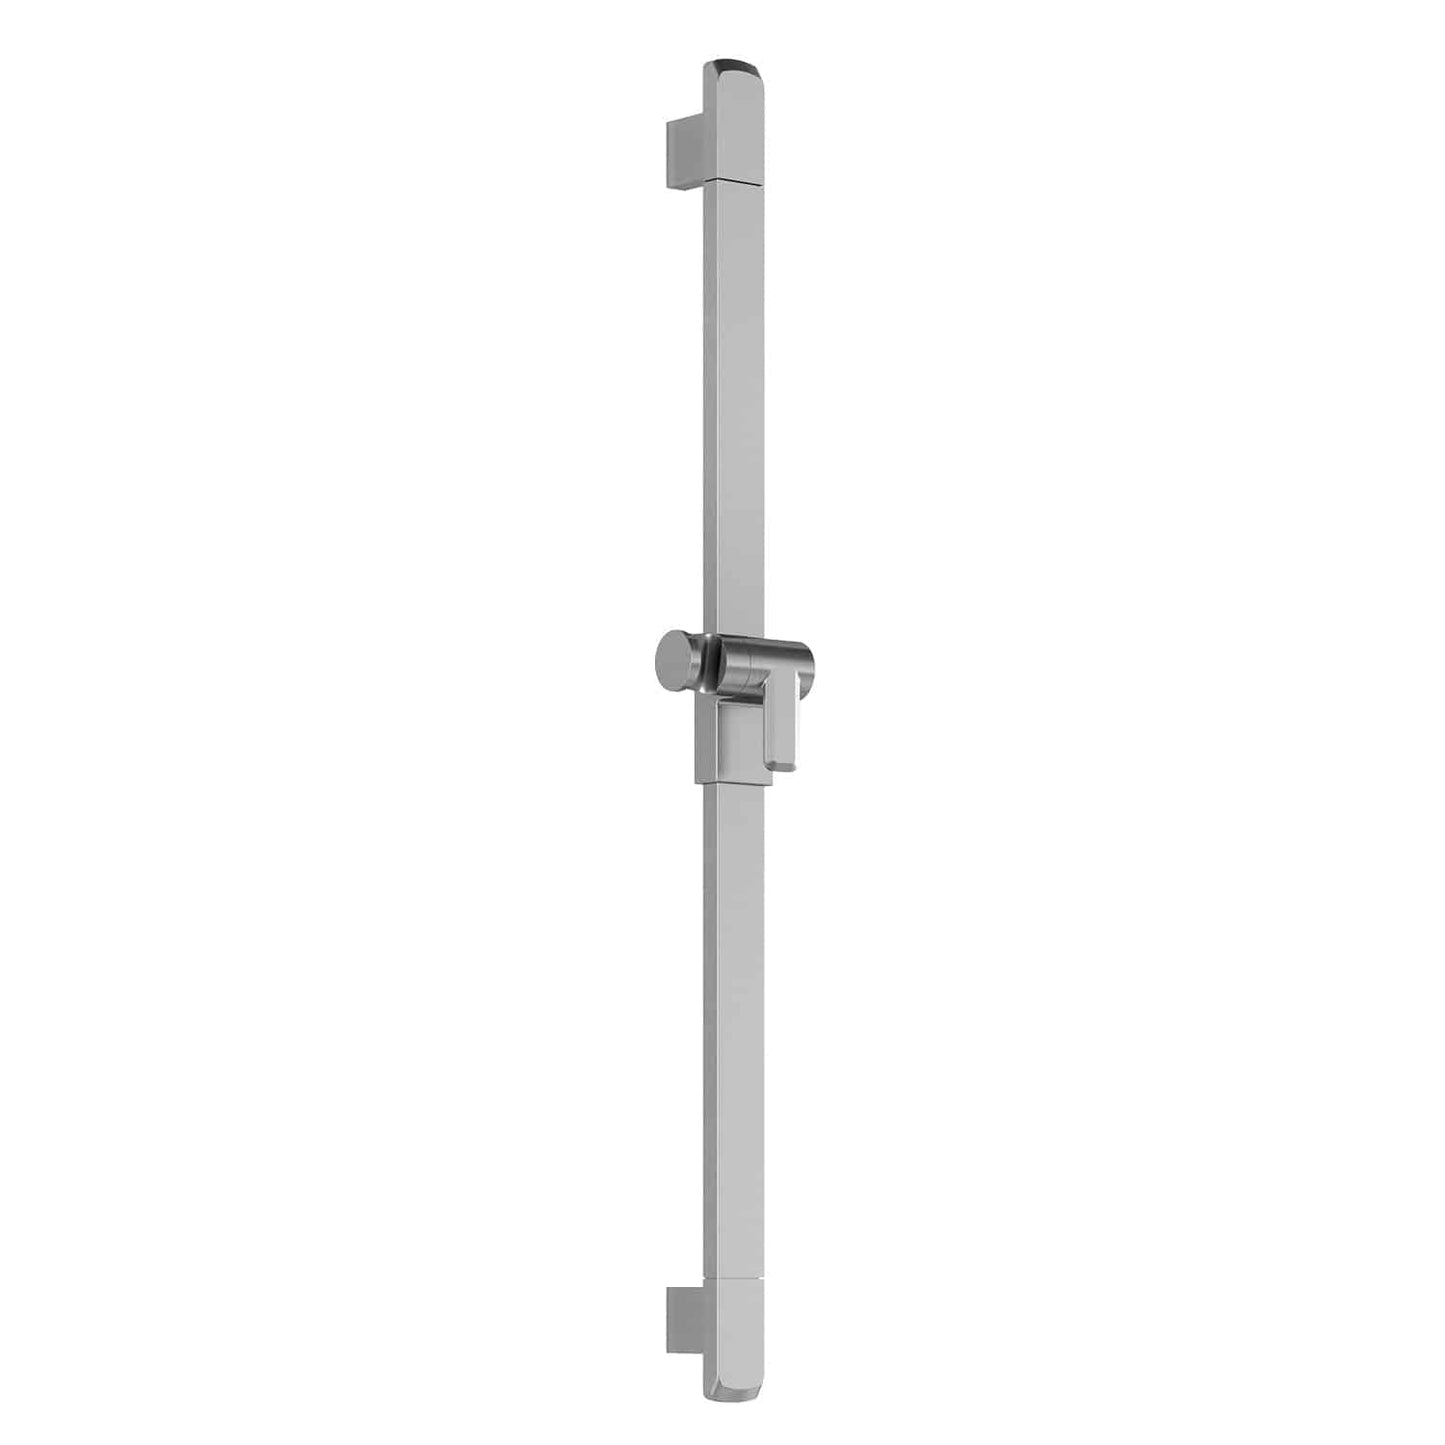 Kalia 30.5" Wall Bar Square Round for Hand Shower- Pure Nickel PVD